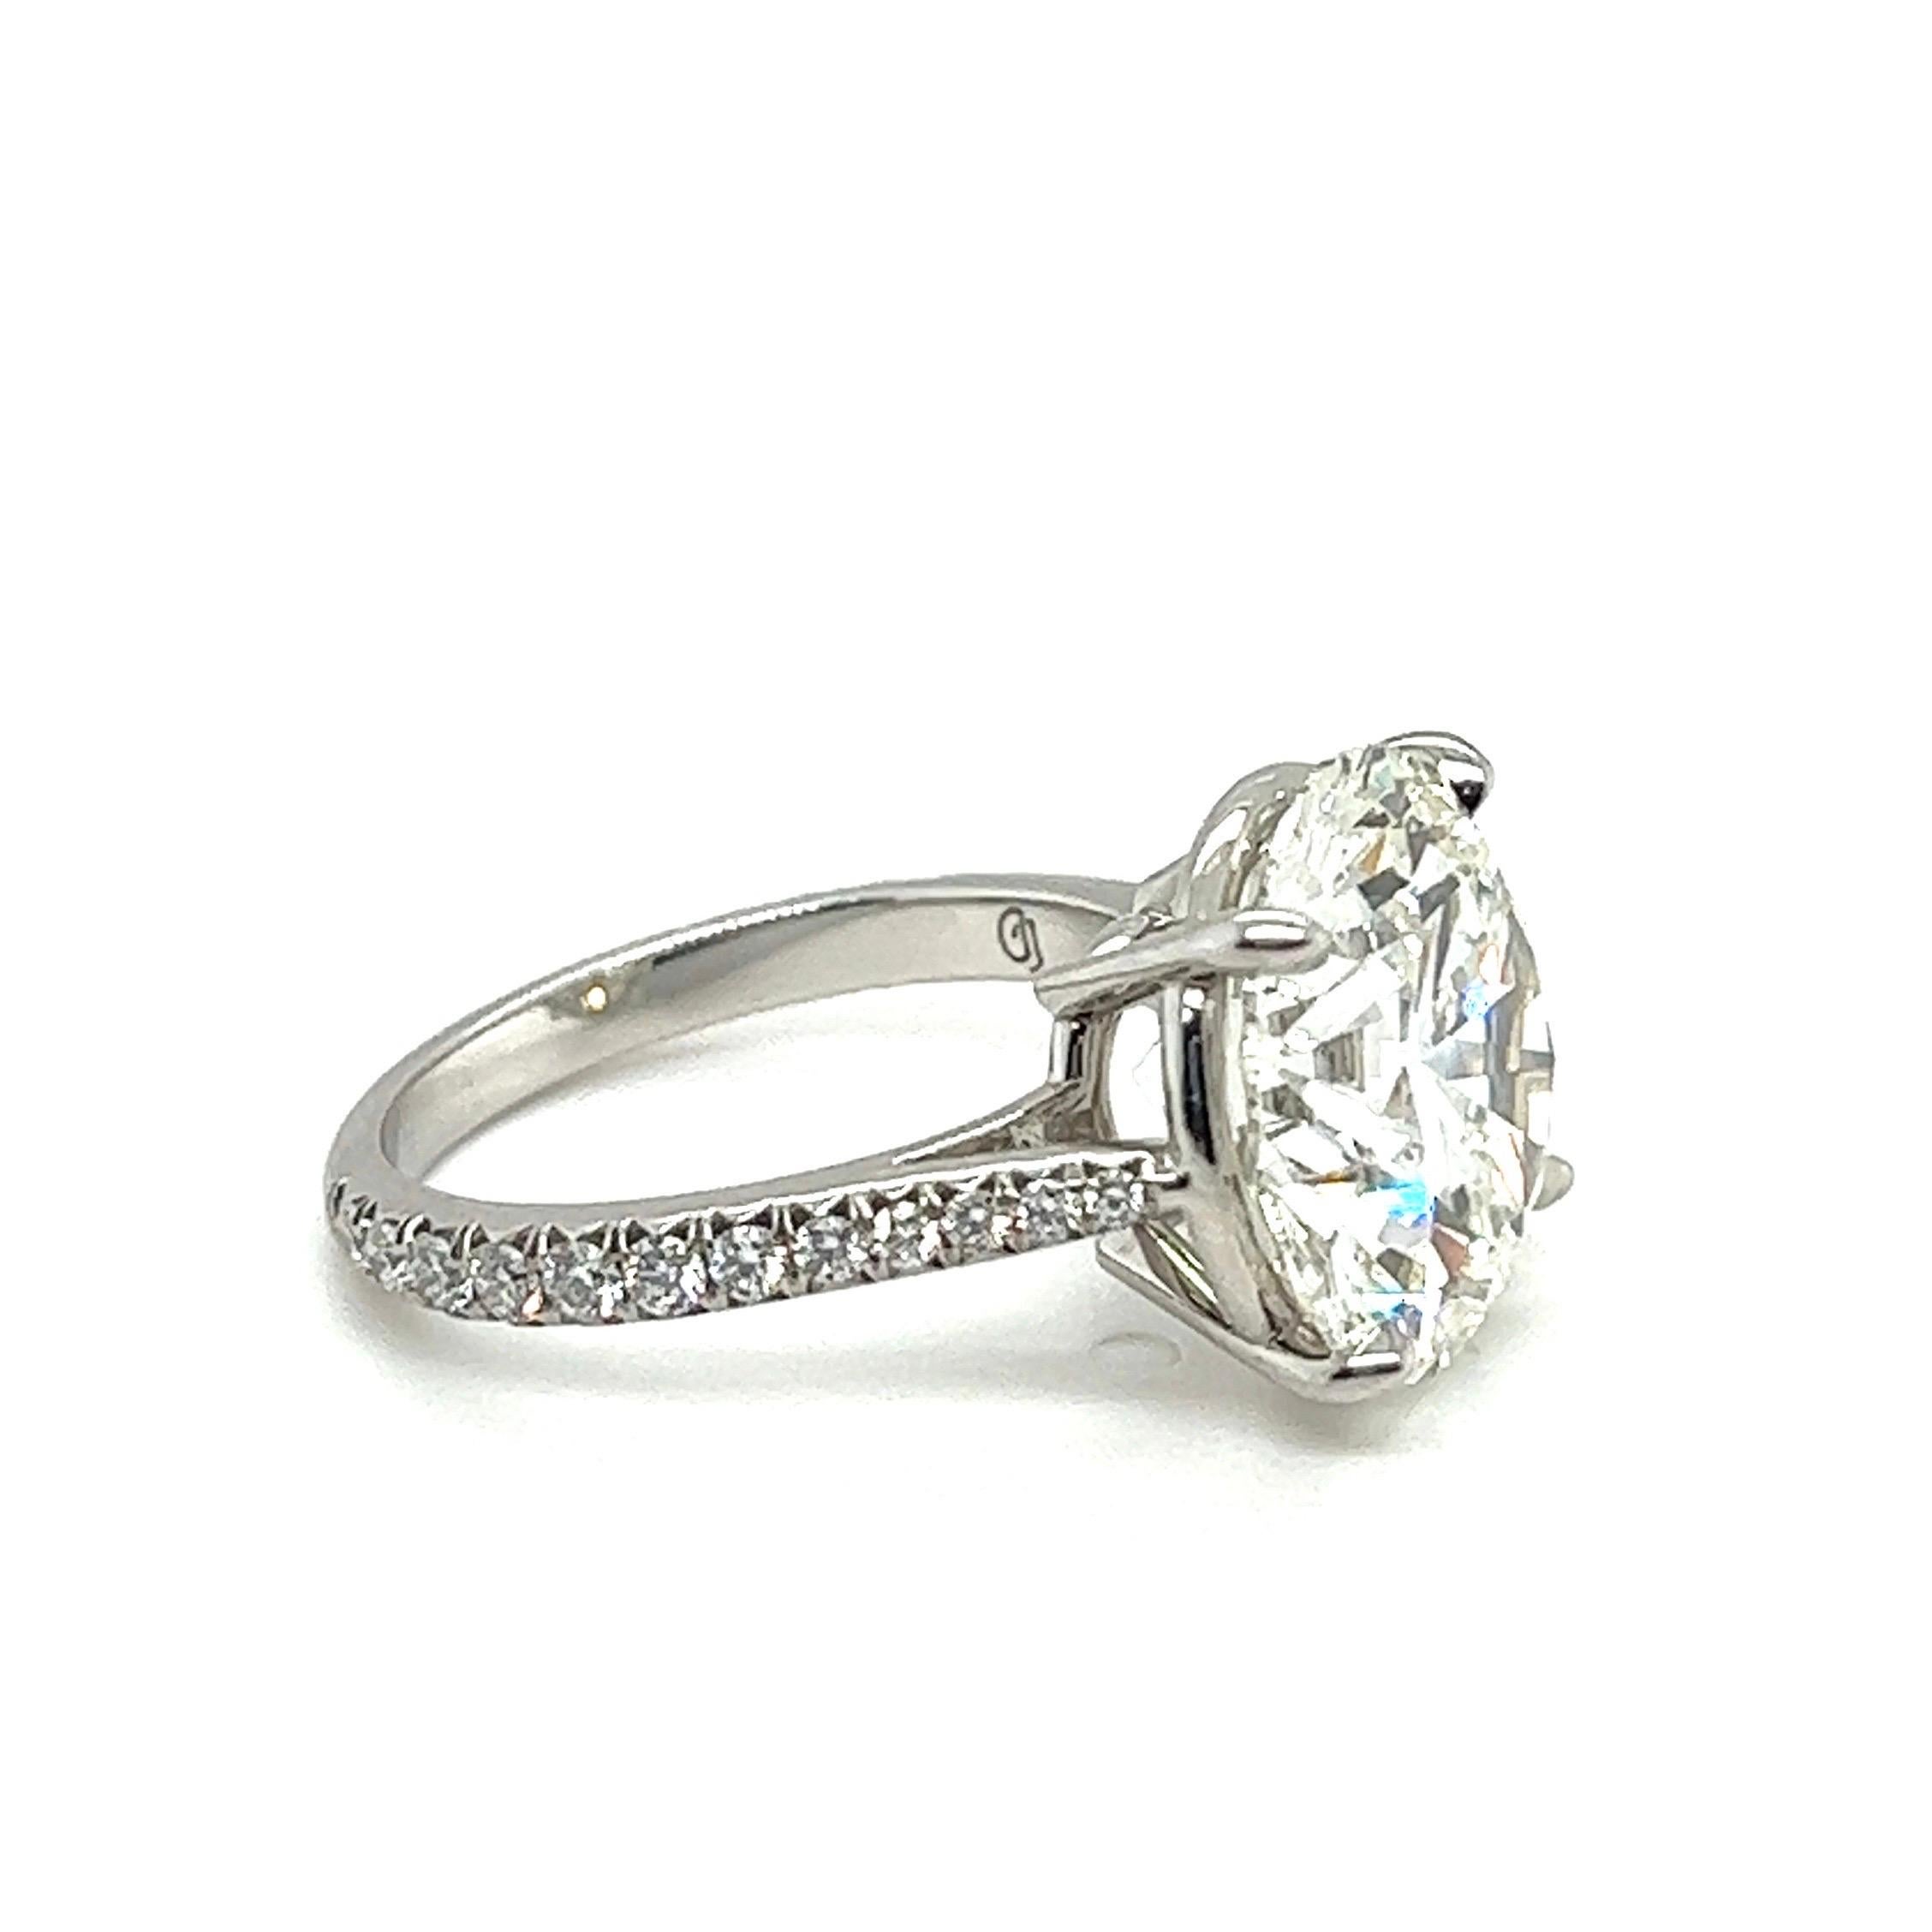 Extraordinary 8.45 carat brilliant-cut diamond and platinum solitaire engagement ring.
Classic solitaire ring centering upon an impressive 8.45 carat brilliant-cut diamond, H / IF. The ring shoulders are decorated with 24 smaller brilliant-cut